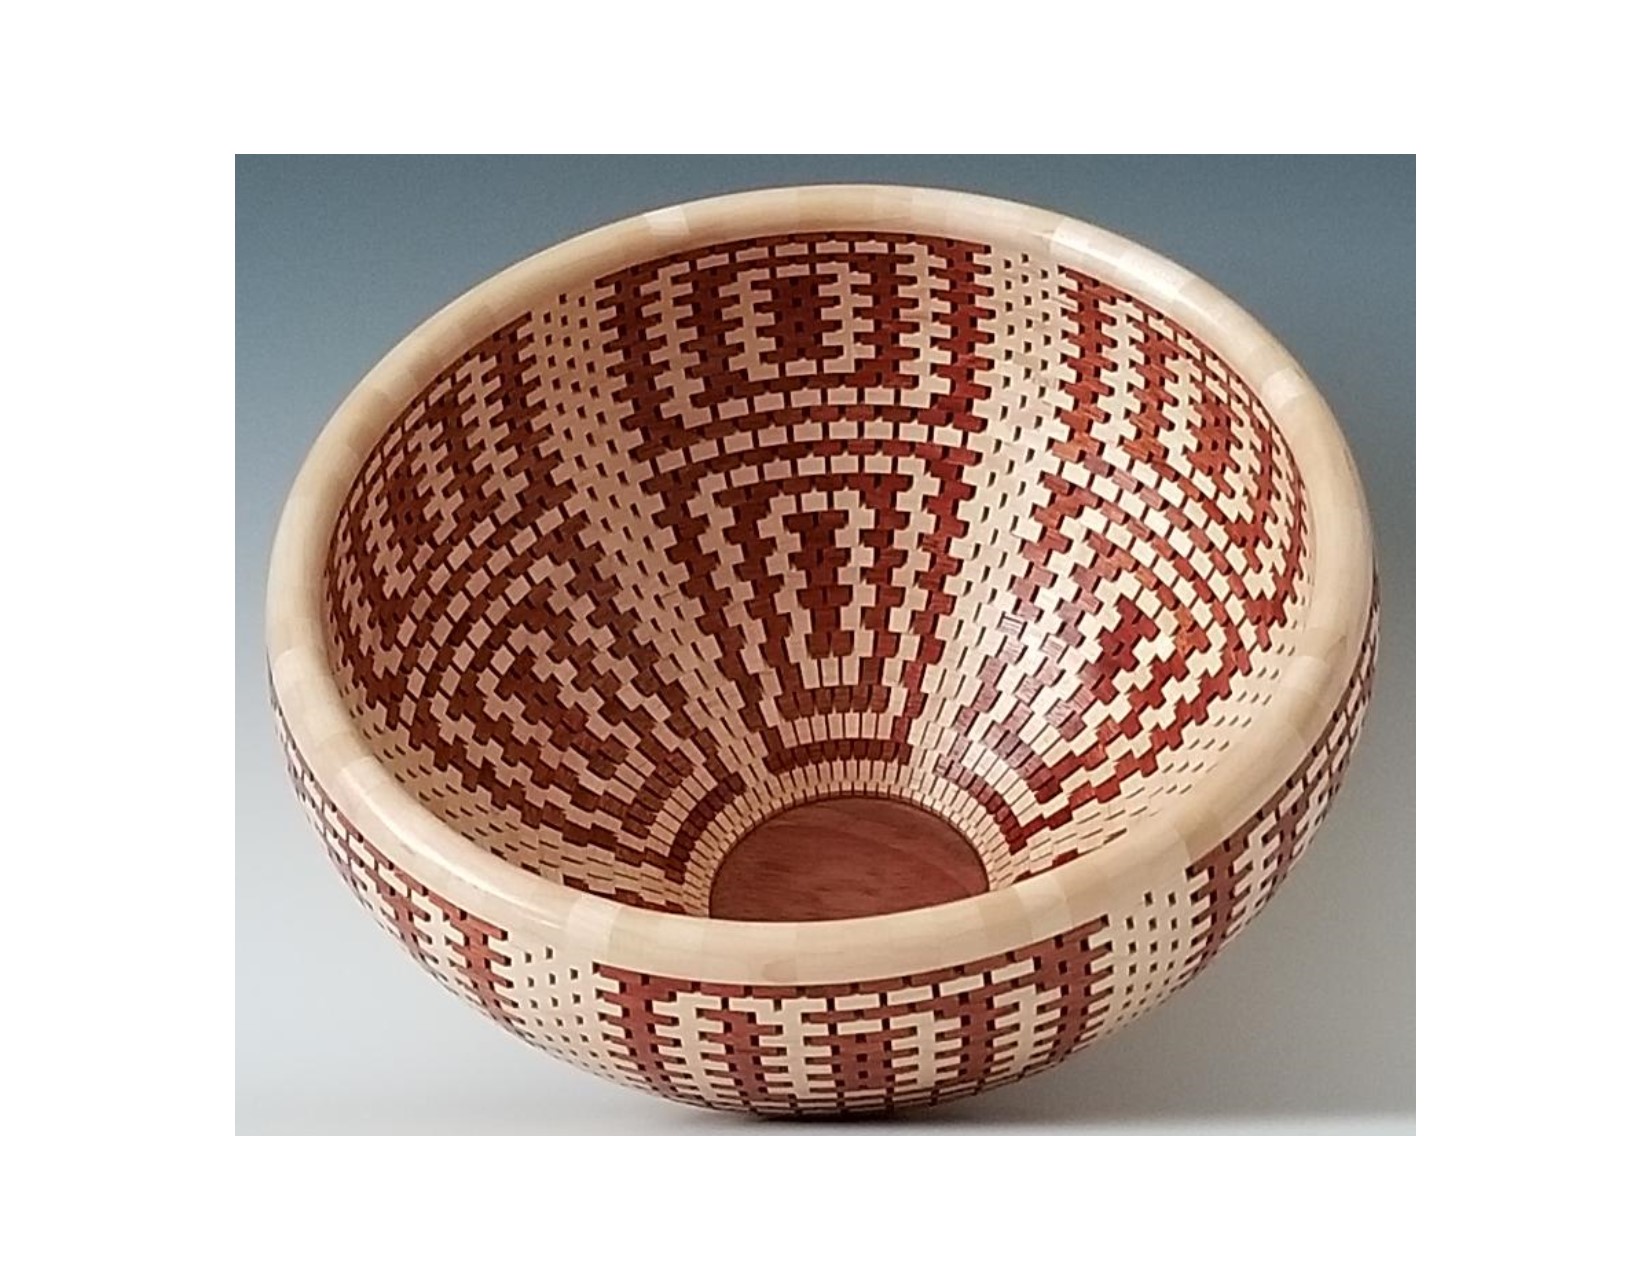 Latest Charity Donation, Aztec Inspired #2 Inside. The bowl is made of Bloodwood and Maple. It is 34 layers of 72 pieces for a total of 2448 pieces.